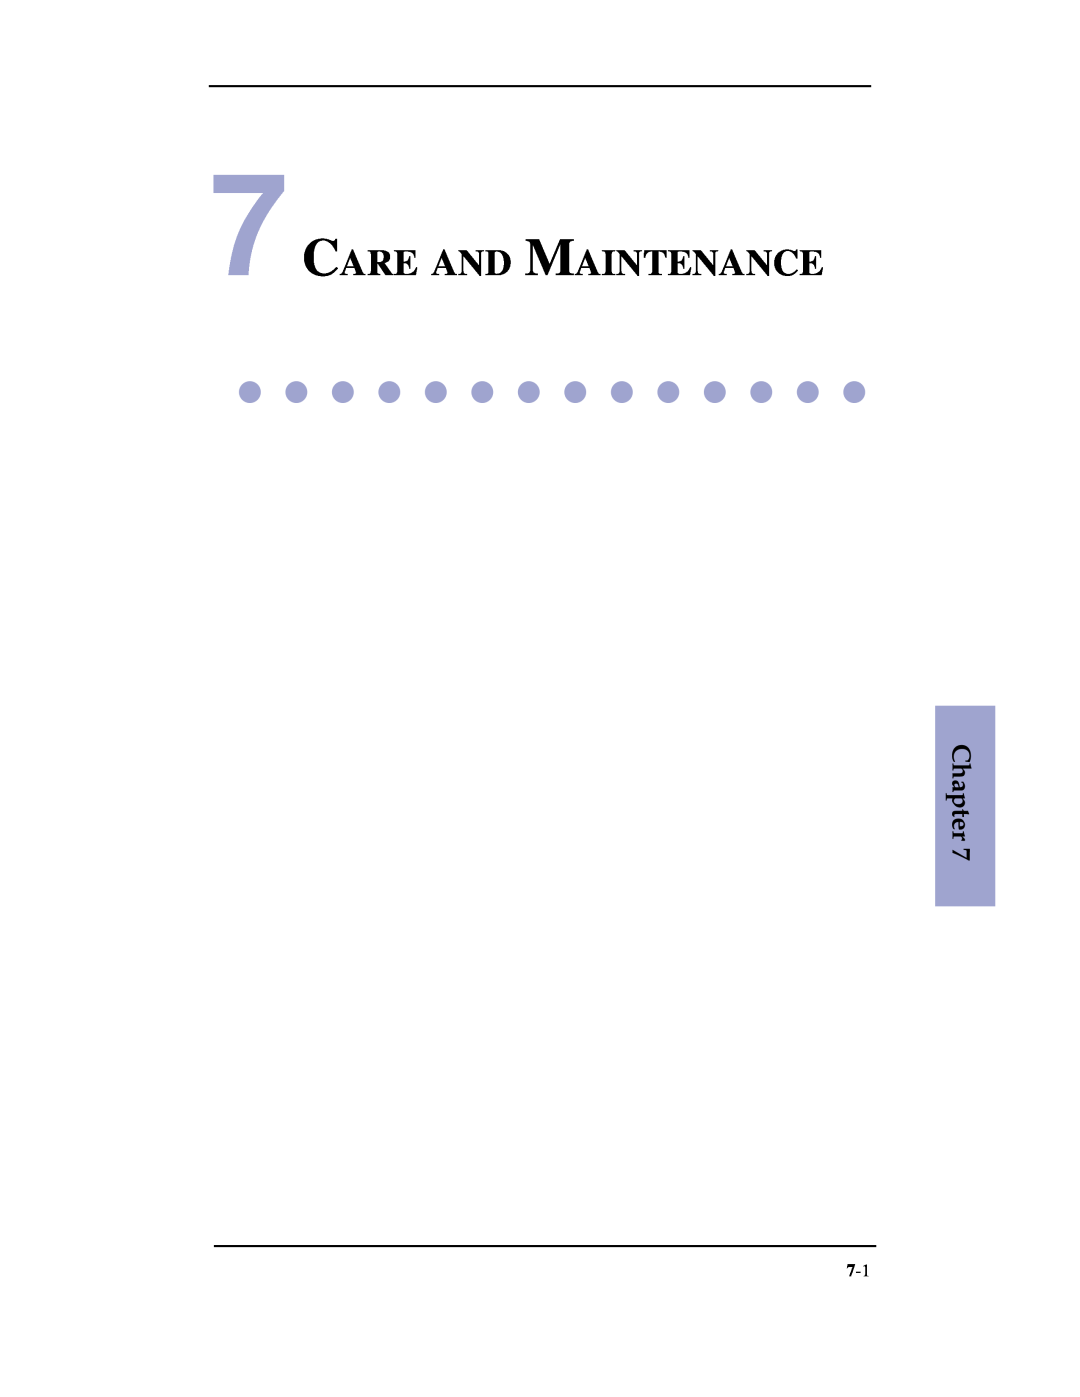 Samsung SF-3100 manual Care And Maintenance, Chapter 